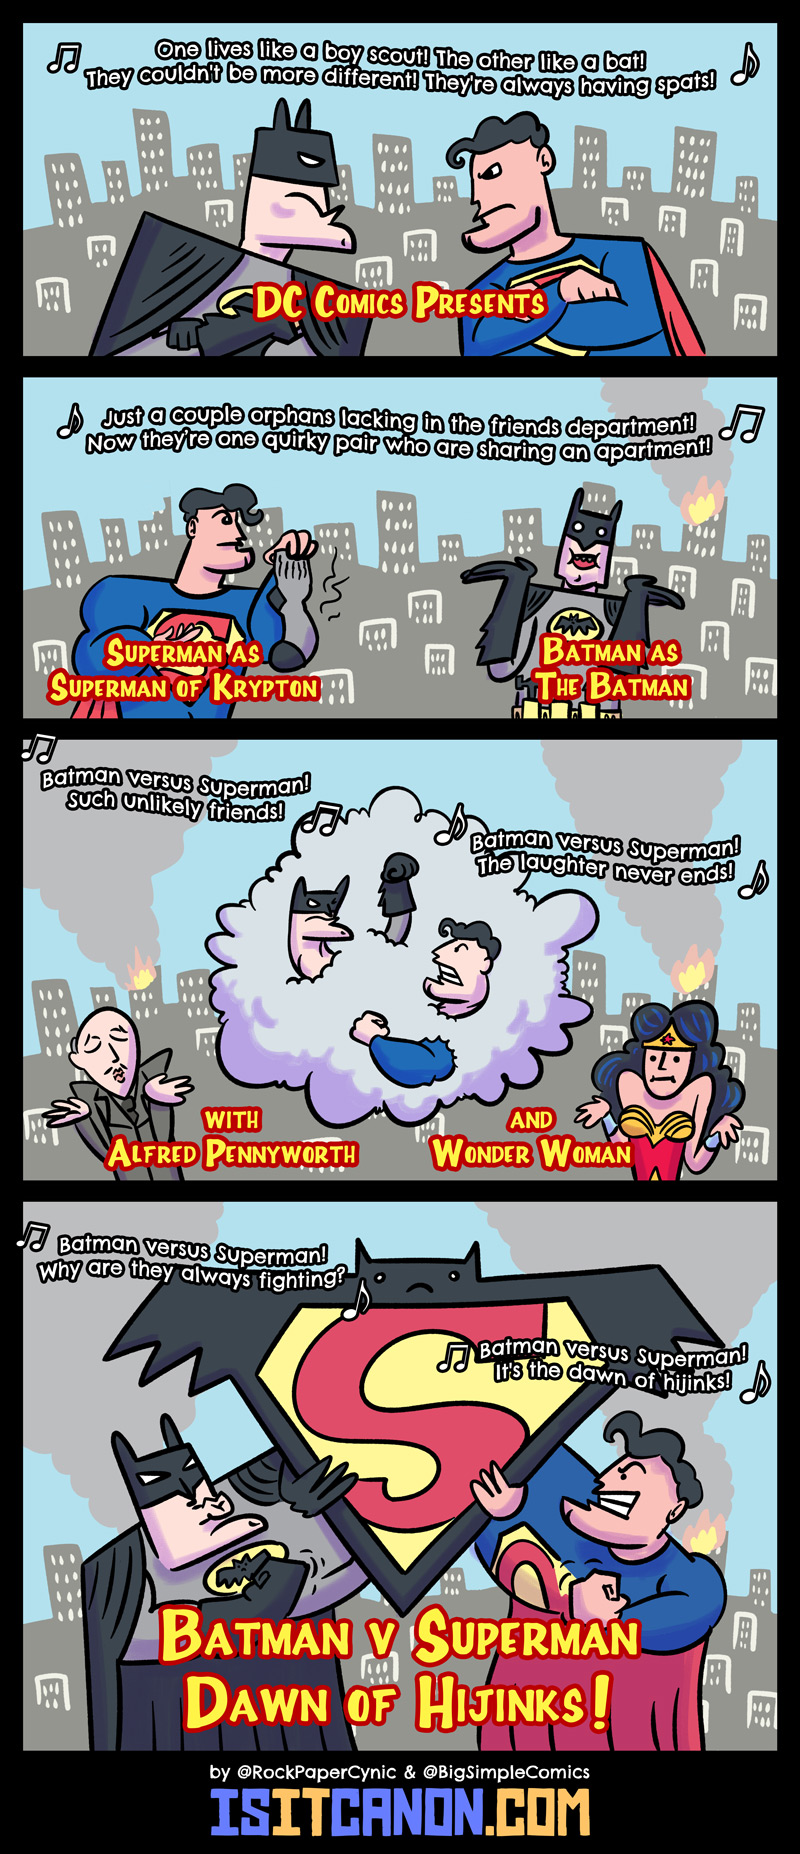 In this comic, we re-imagine Zach Snyder's Batman vs. Superman as a wacky 90s sitcom about 2 superhero roommates who can't get along: Batman vs. Superman: Dawn of Hijinks!